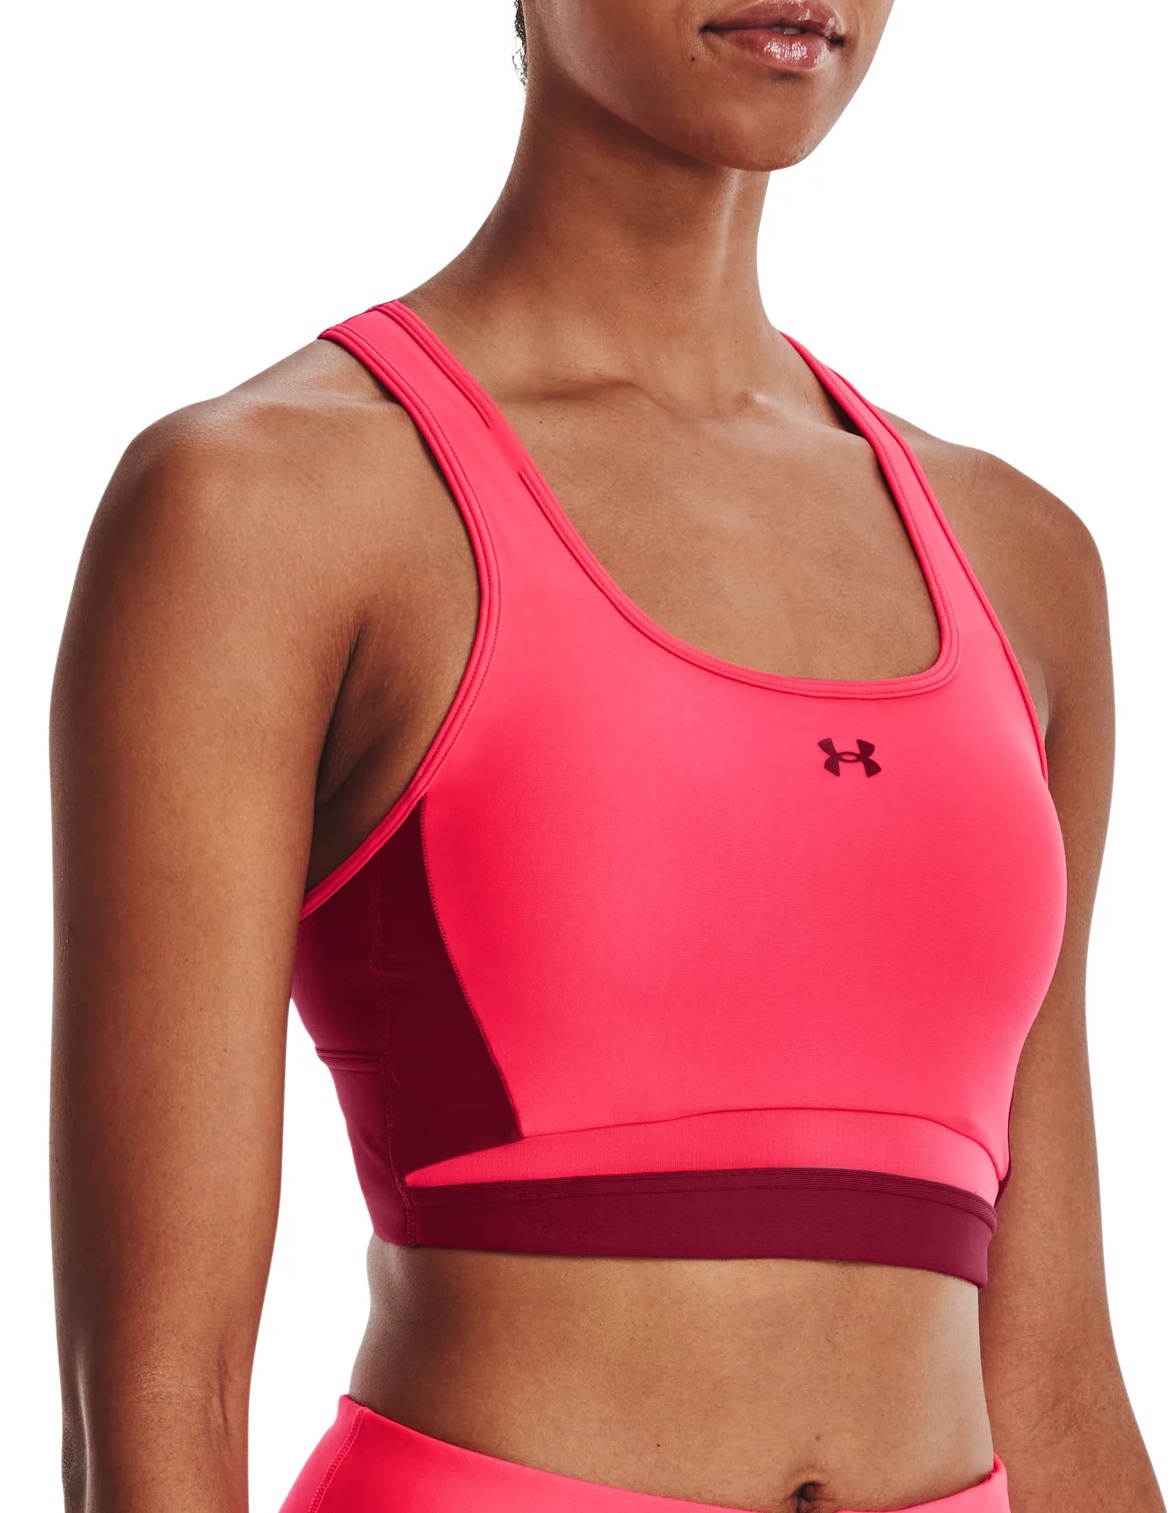 https://i1.t4s.cz/products/1372798-975/under-armour-ua-crossback-long-line-pnk-458461-1372798-975.jpg